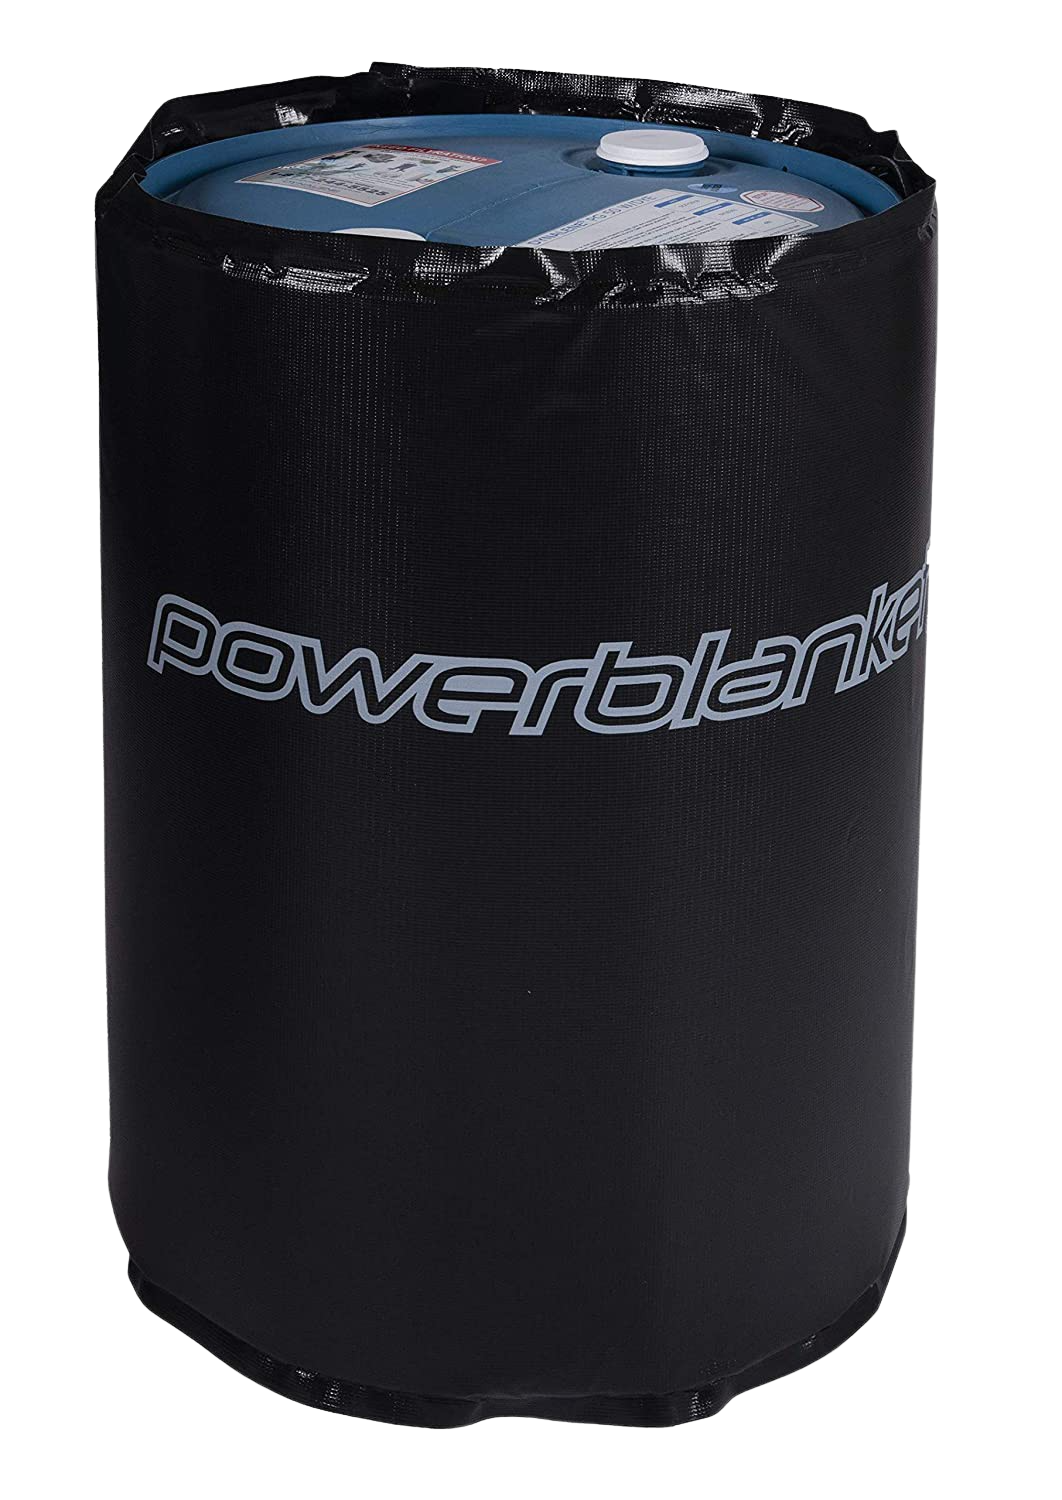 Powerblanket, Powerblanket BH30RR 30 Gallon Insulated Drum Heating Blanket 100°F Fixed New